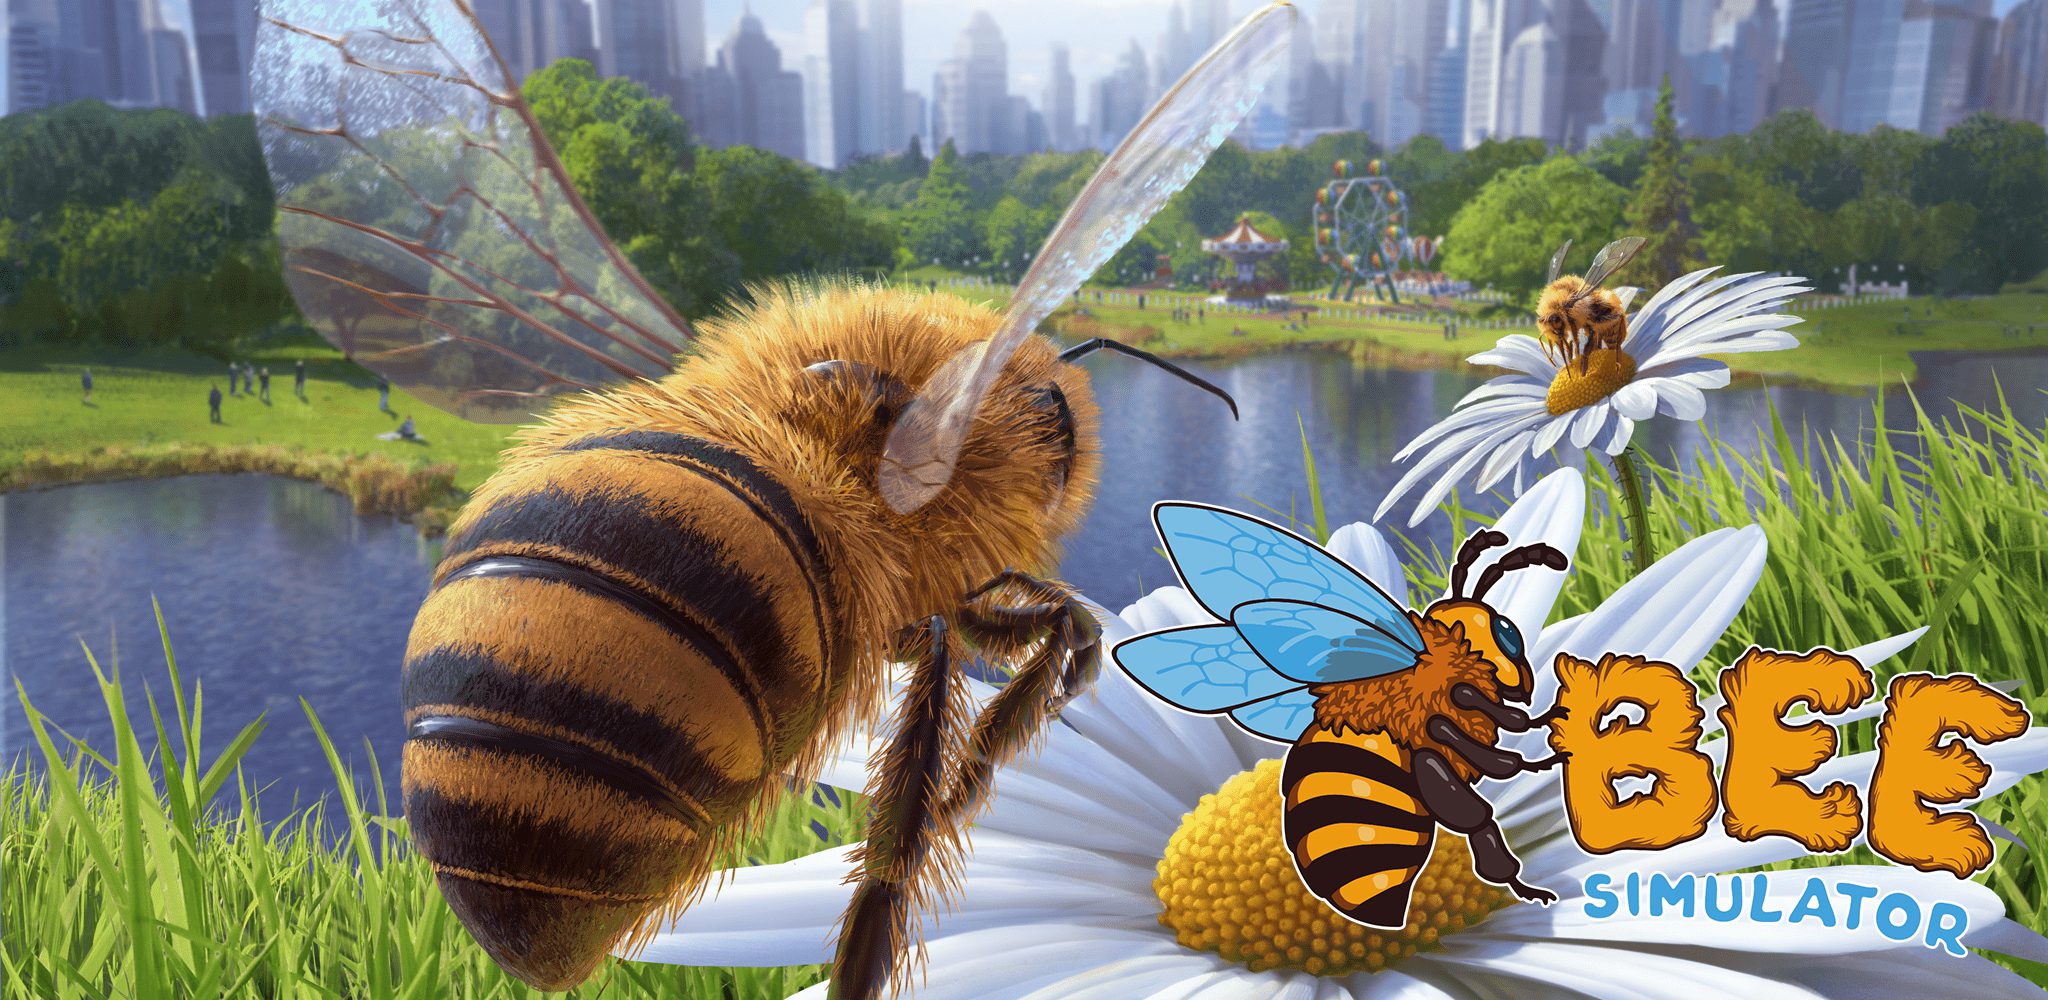 Bee Simulator review: Barry B. Benson would be proud